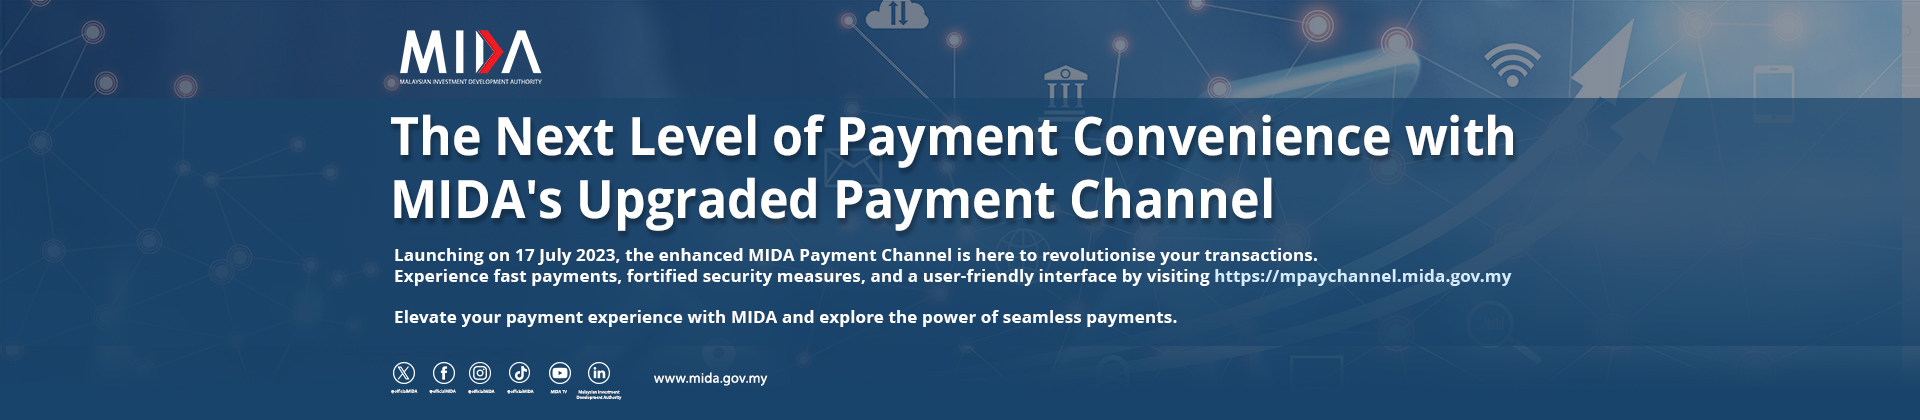 The Next Level of Payment Convenience with MIDA's Upgraded Payment Channel